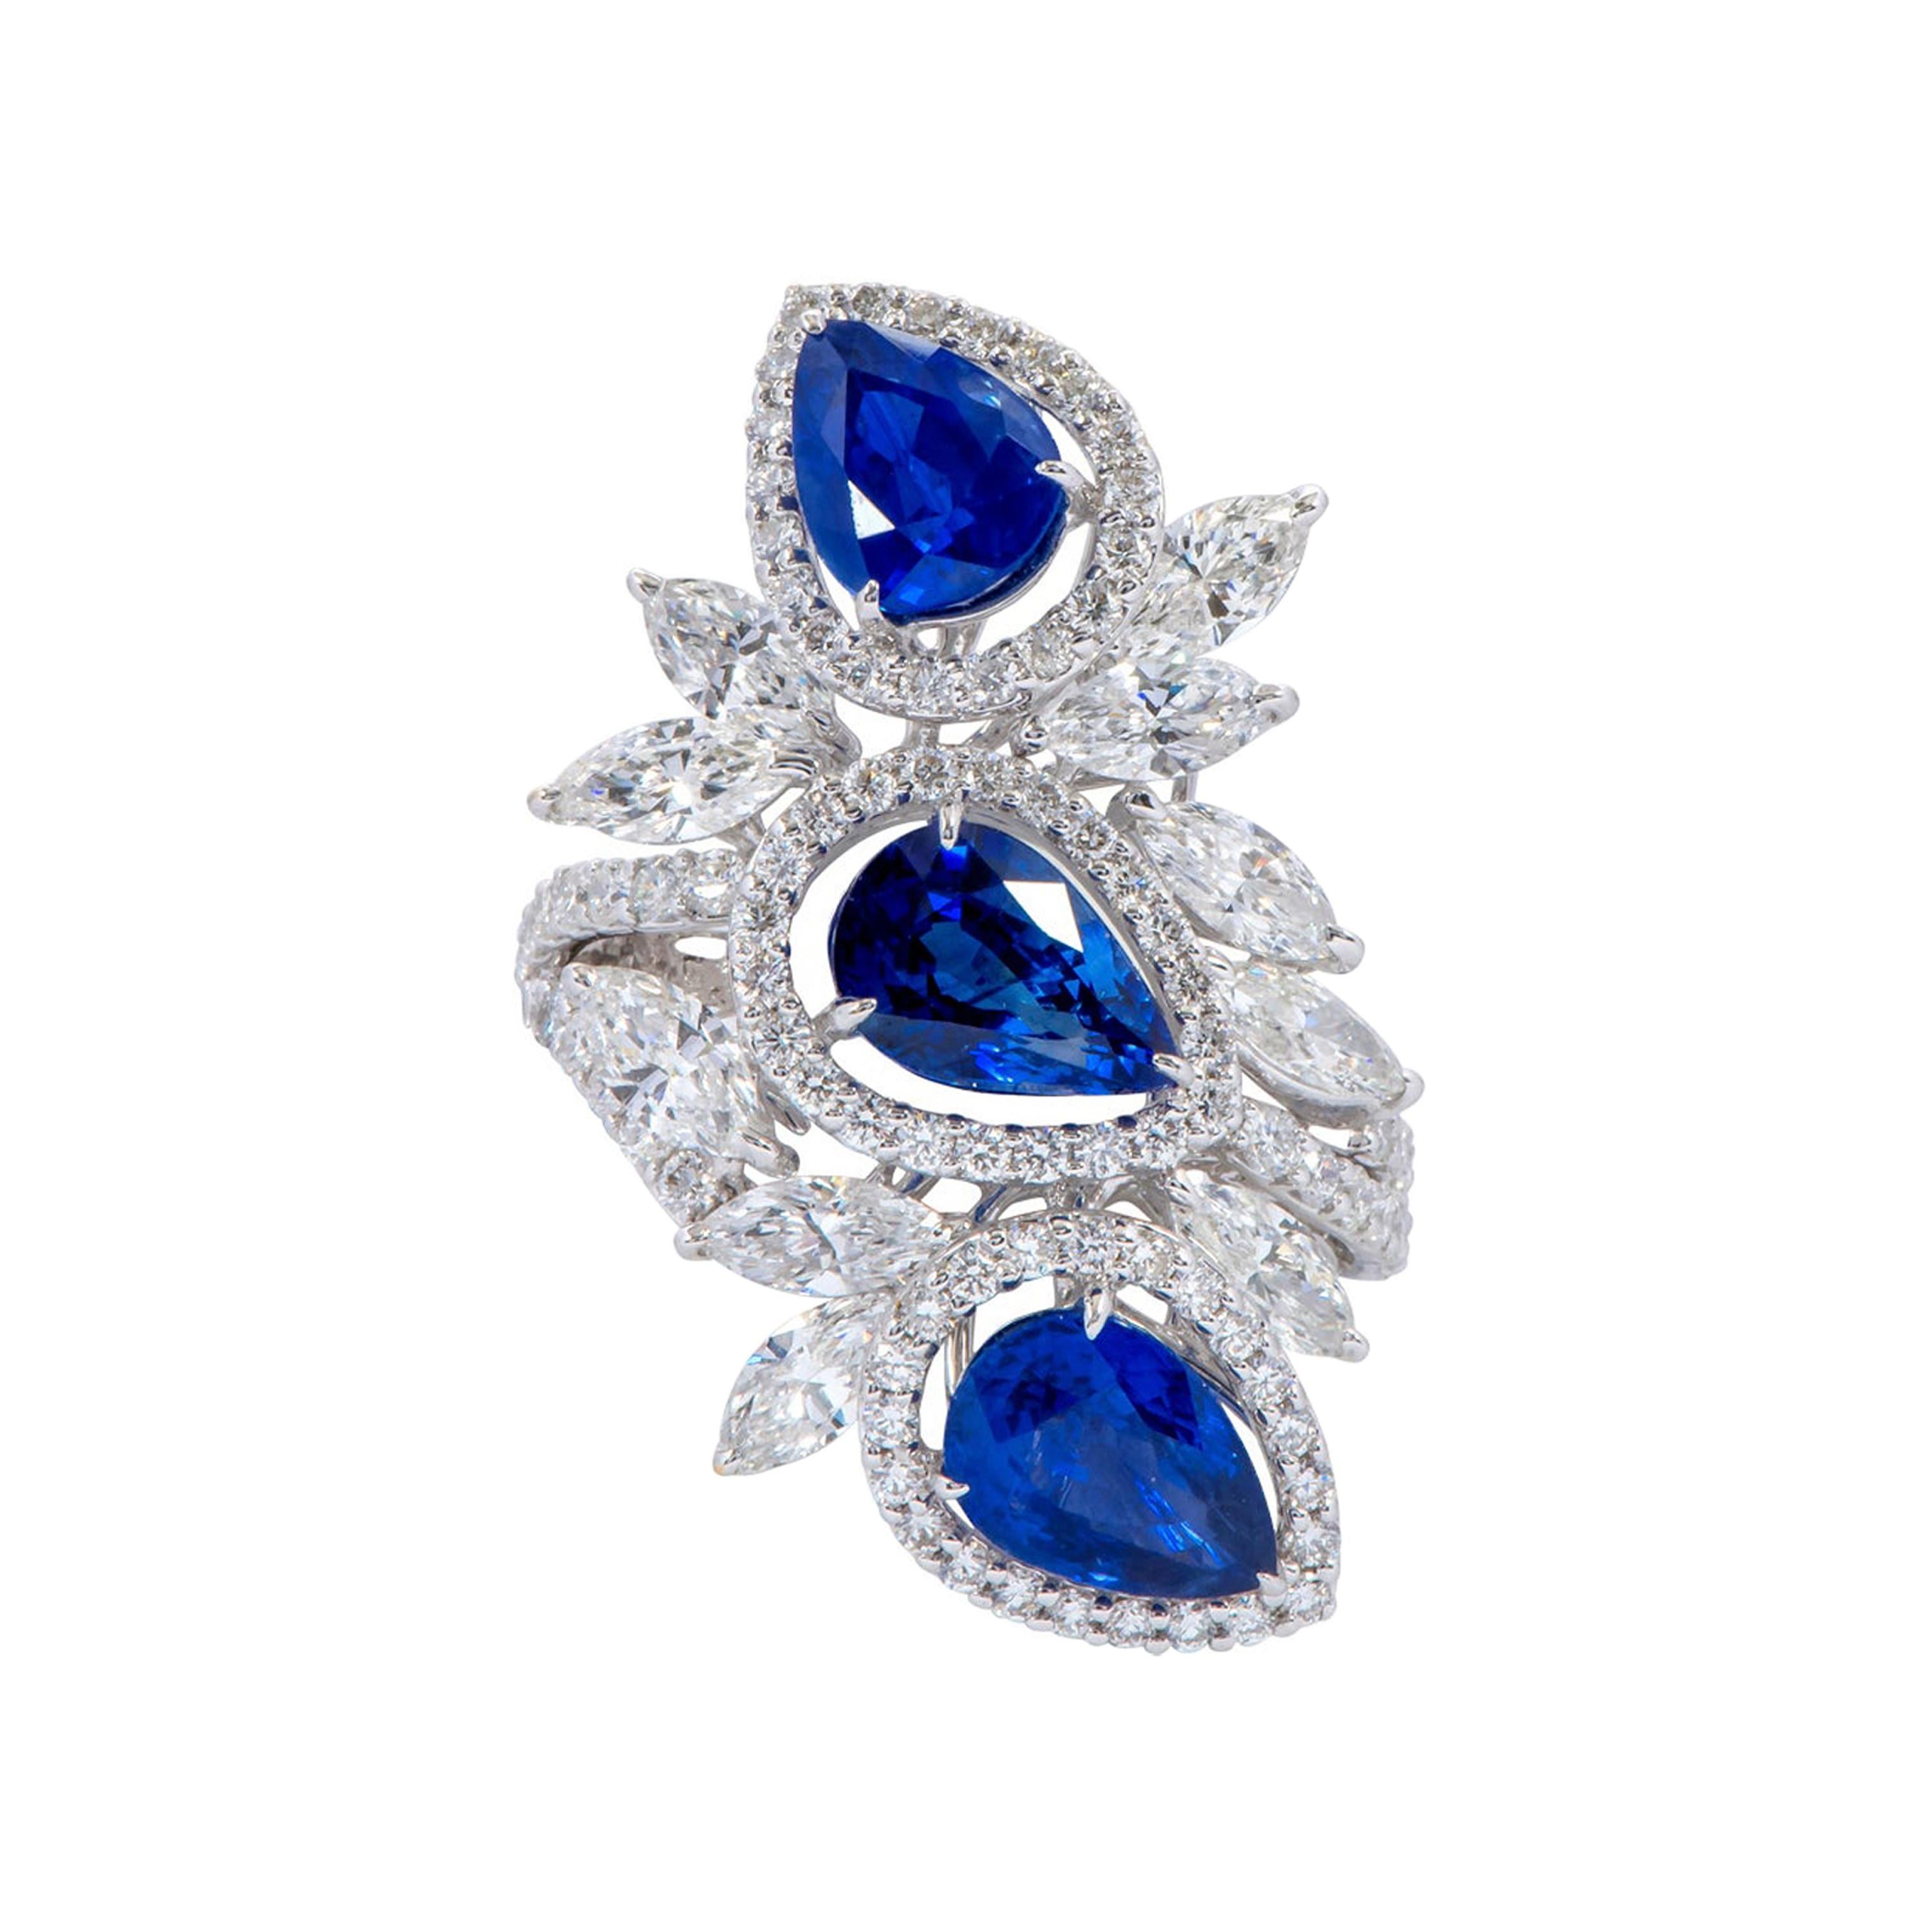 18 Karat White Gold 5.43 Carat Sapphire and Diamond Cocktail Ring For Sale